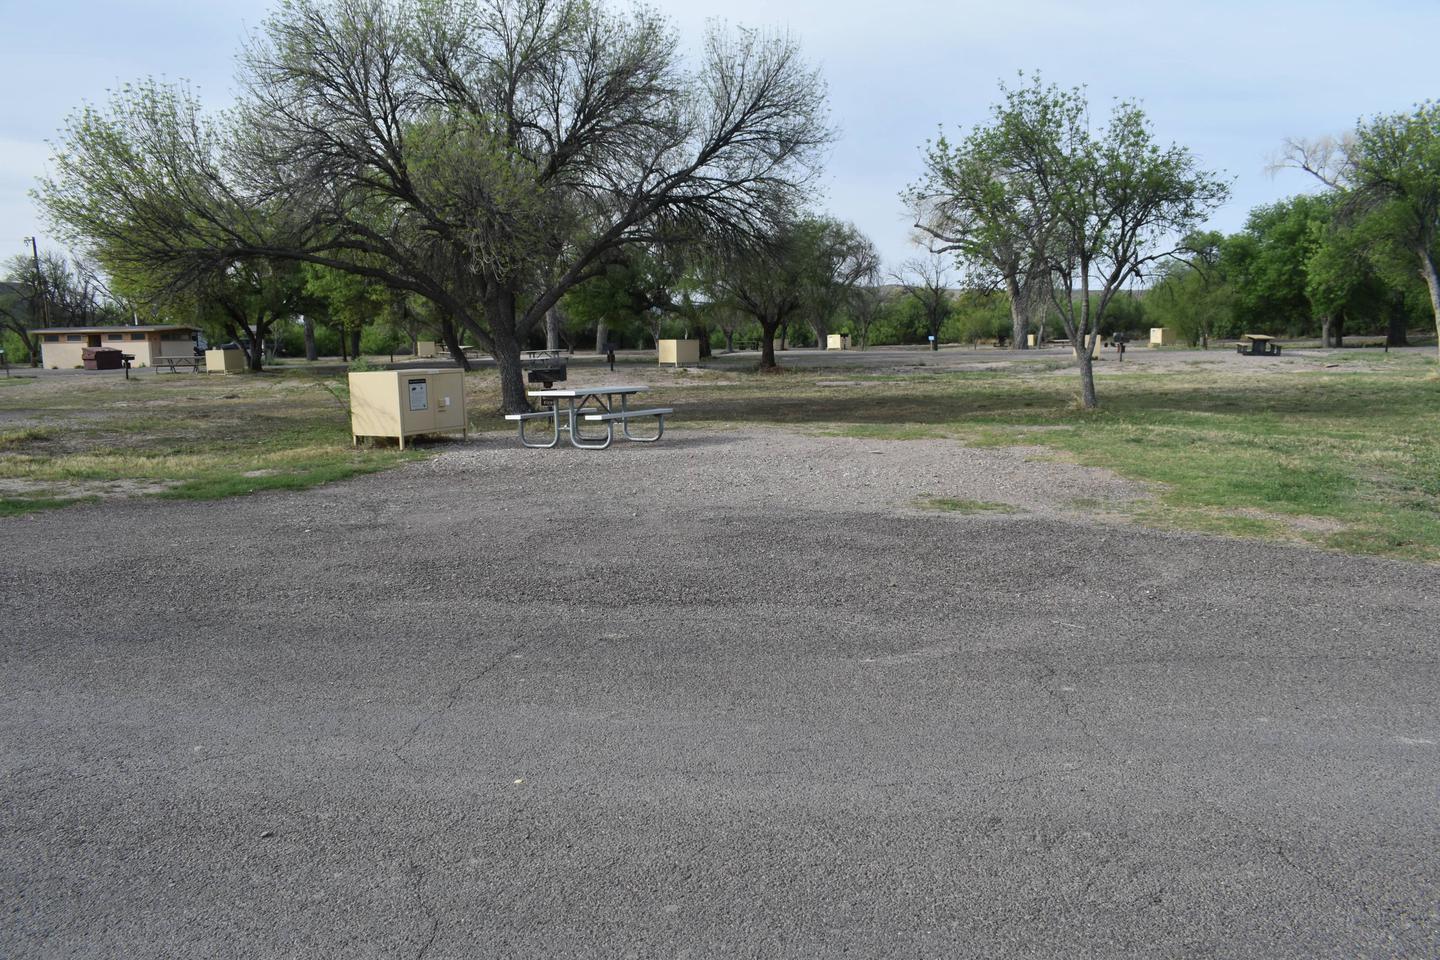 Distant view of parking area and camp site with shade treesParking and camping area for Site 64